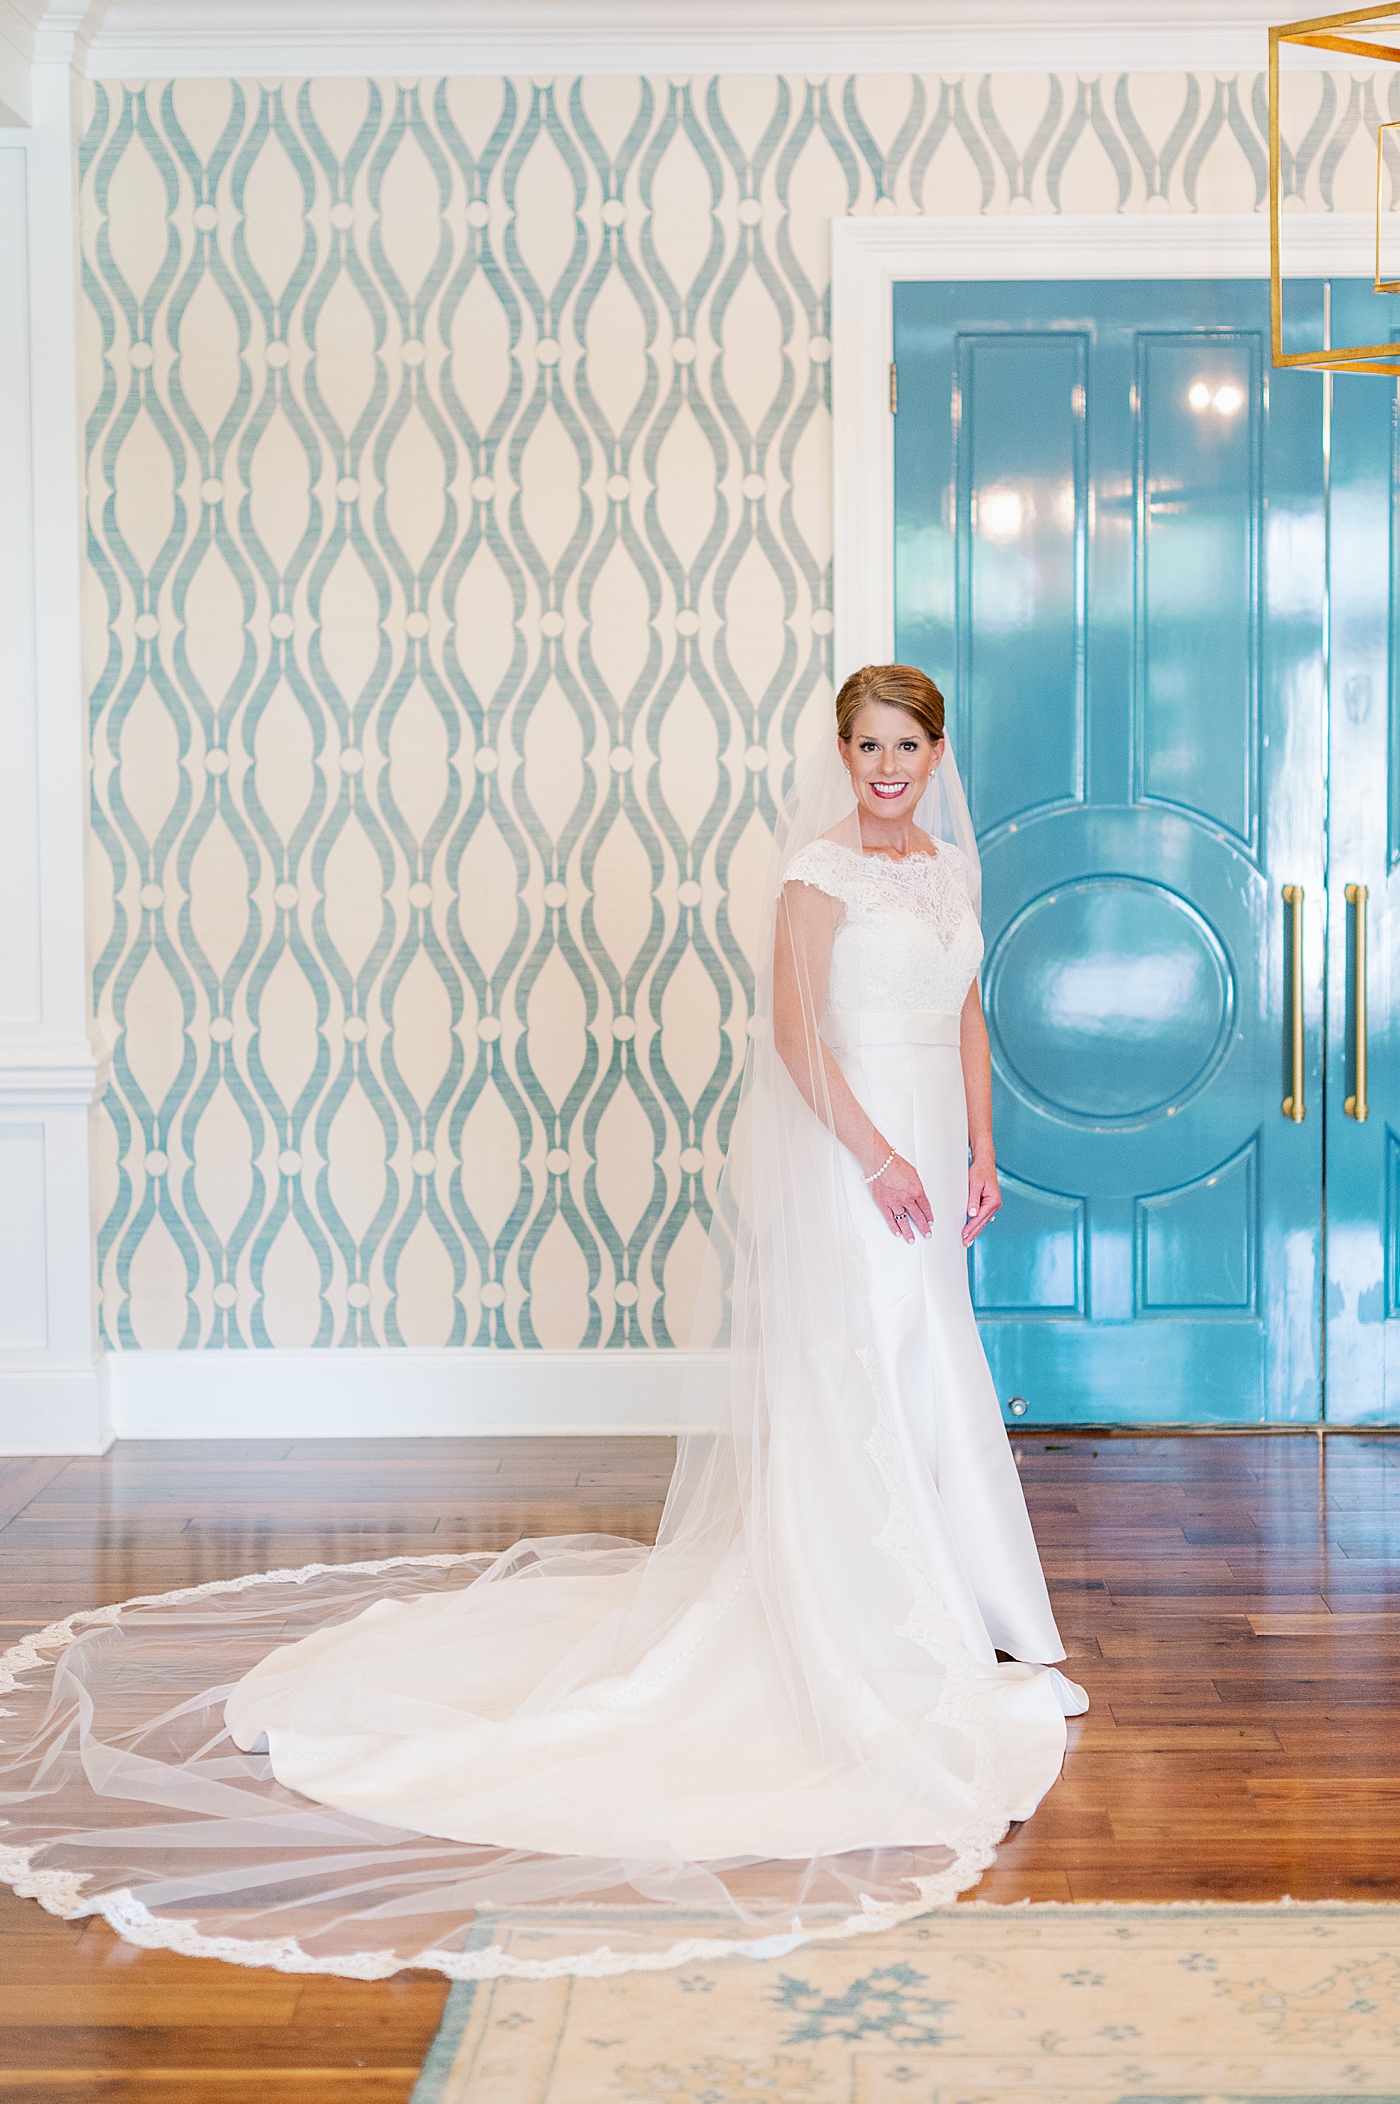 Bride posing for a portrait in her getting ready room | Image by Annie Laura Photo